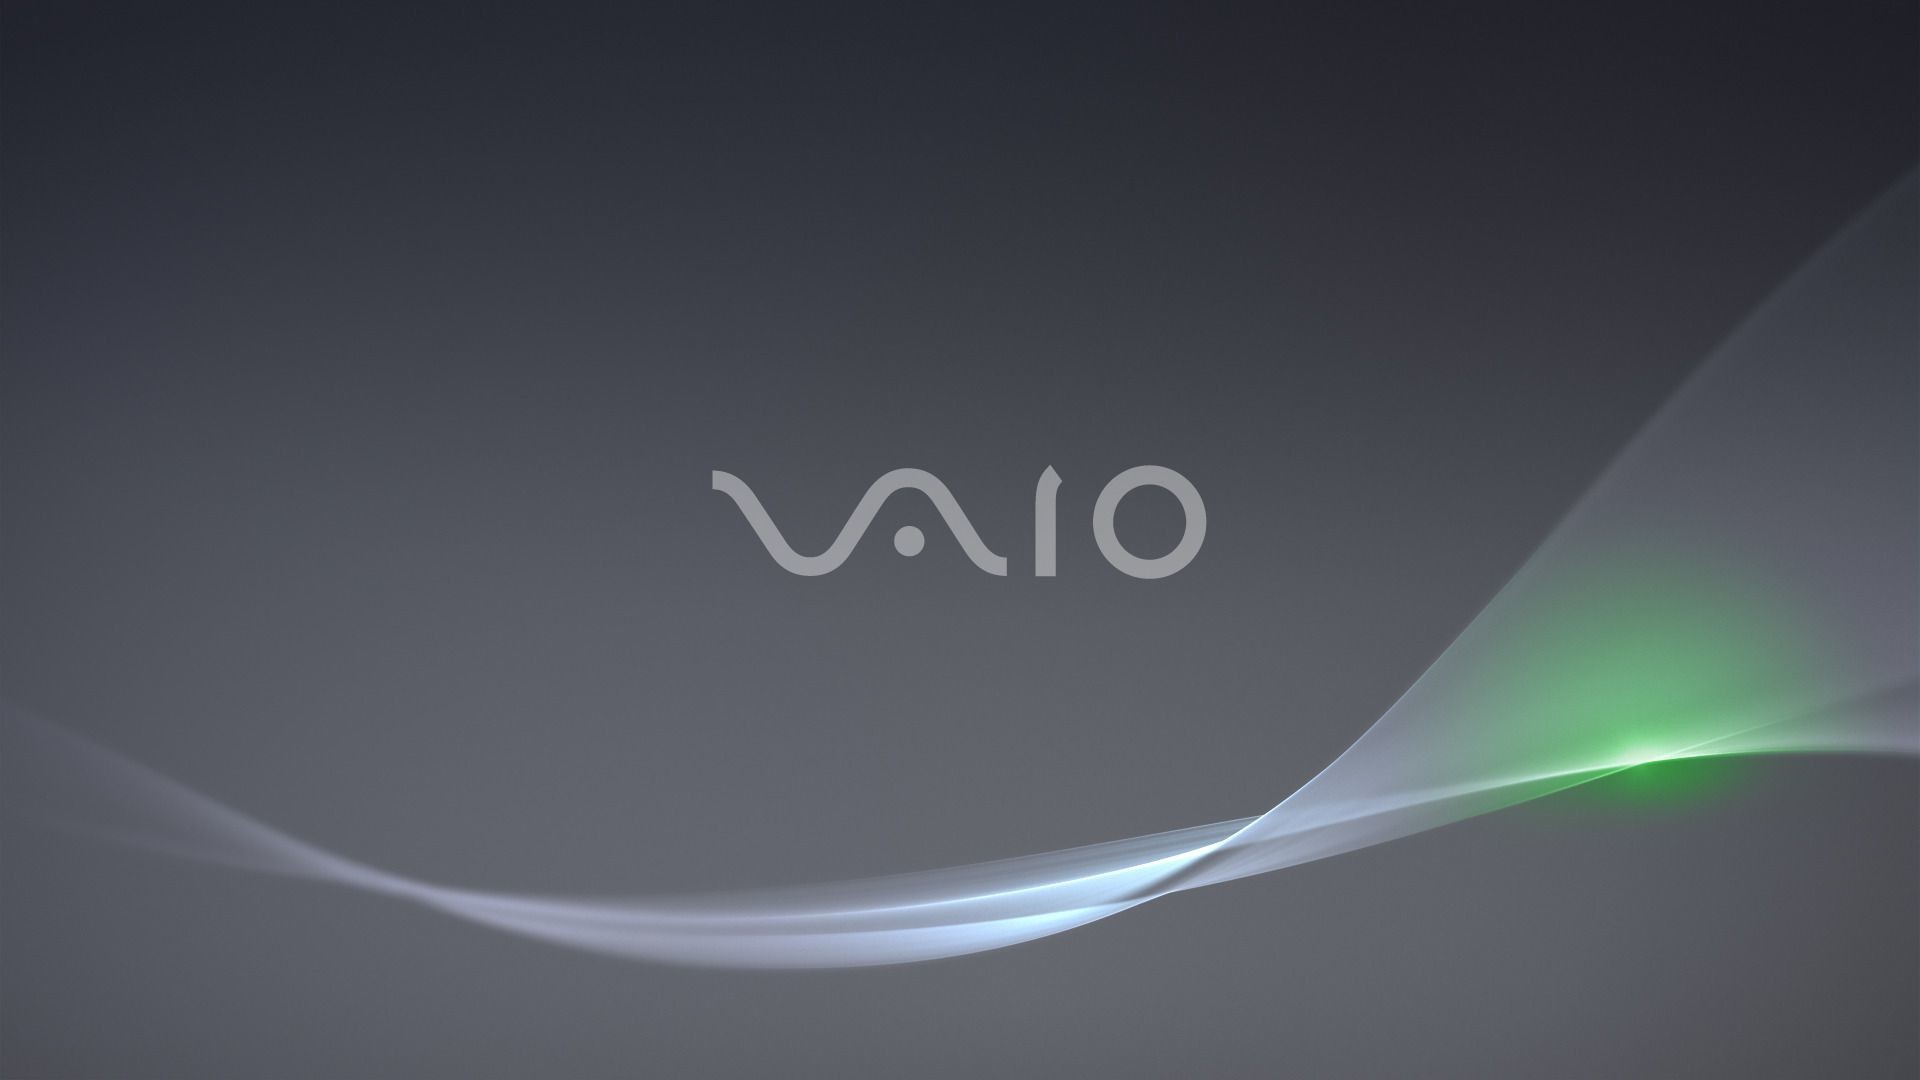 Sony Vaio Wallpapers